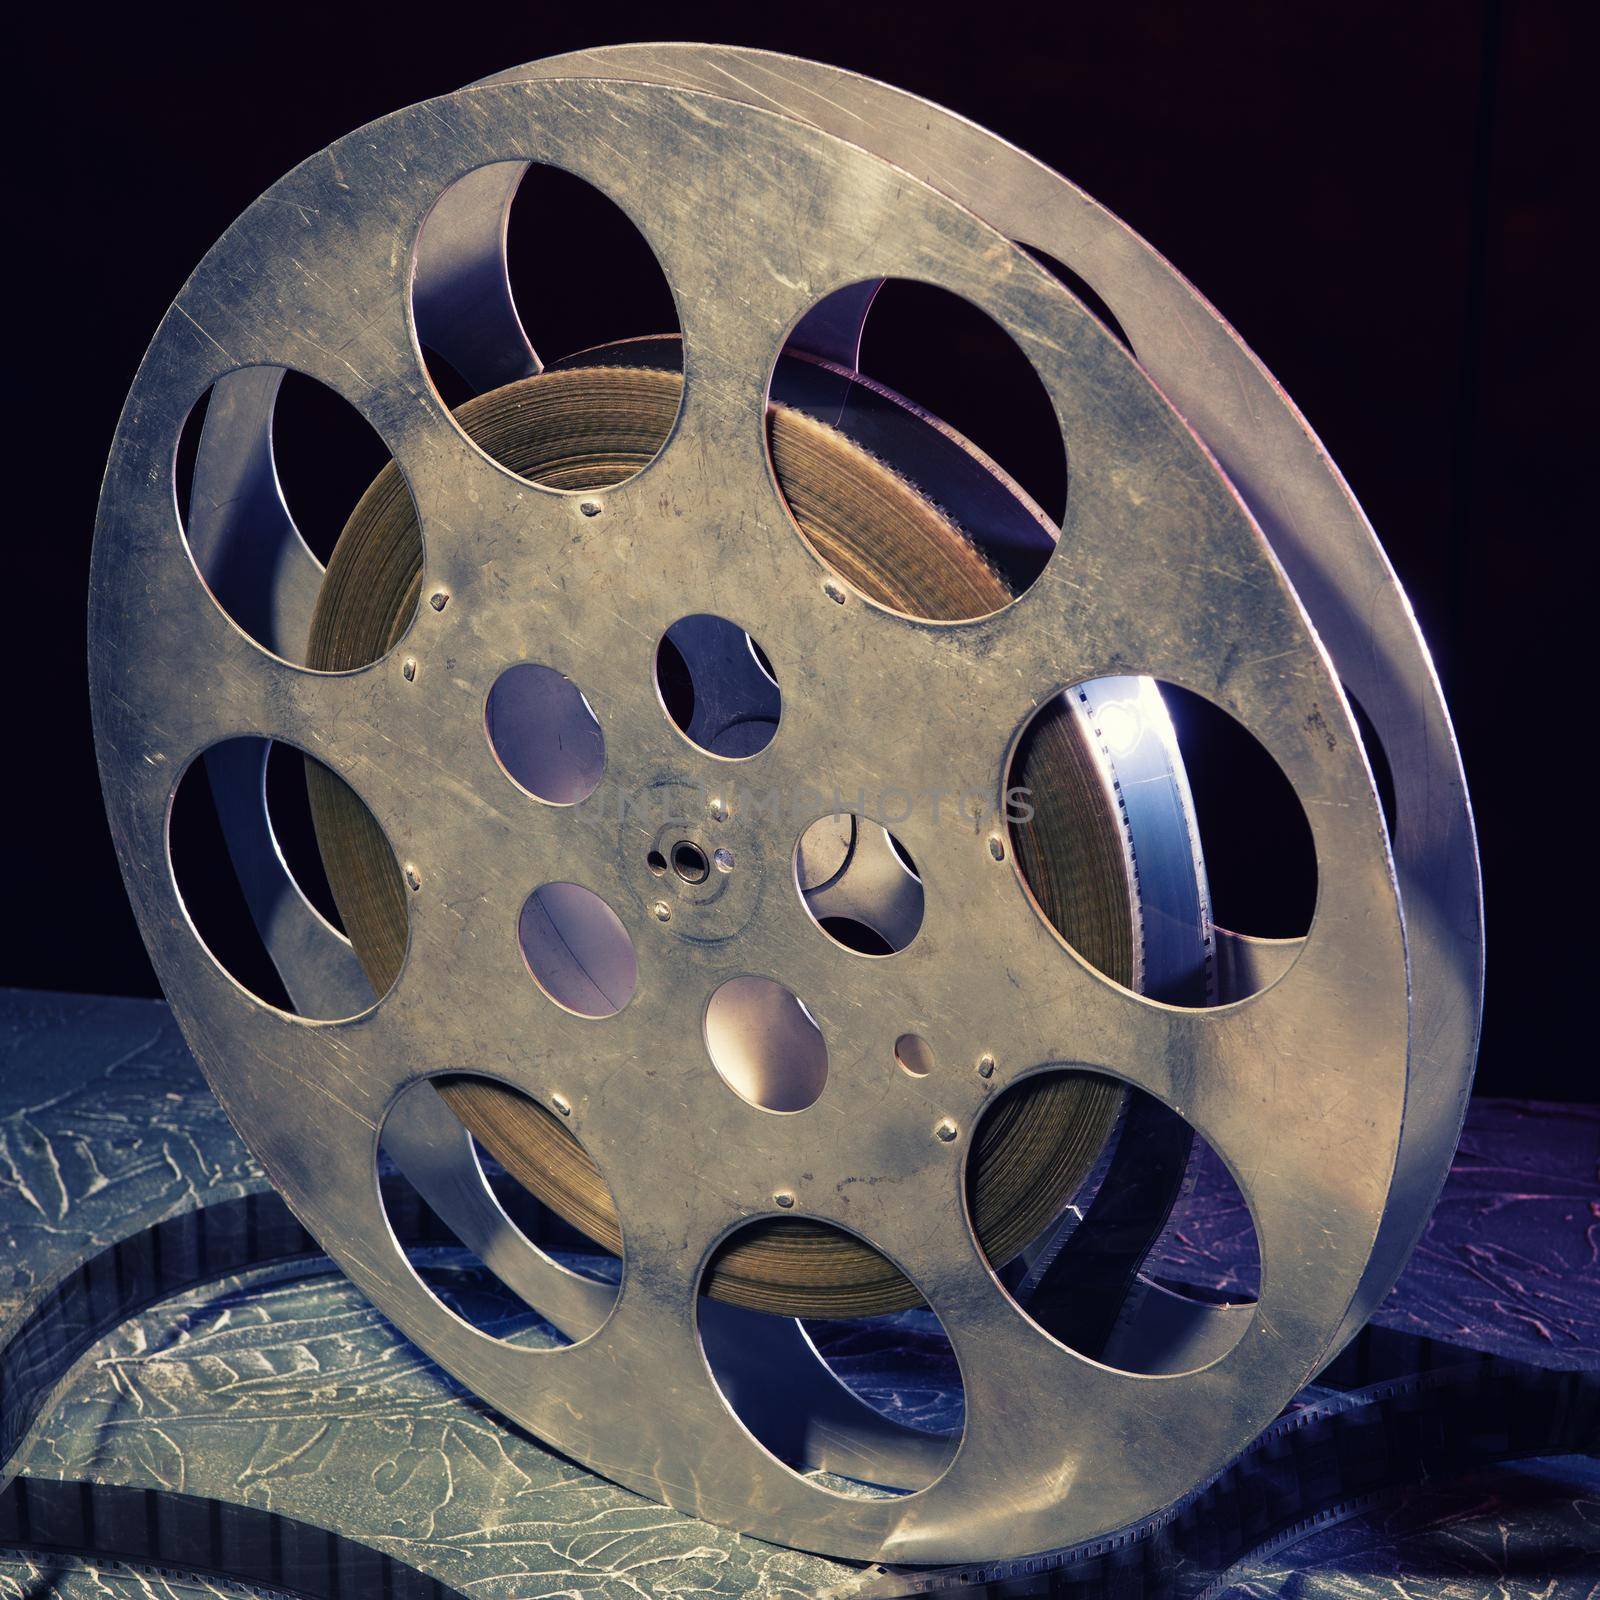 35 mm film reel with dramatic lighting on a dark background - image toned